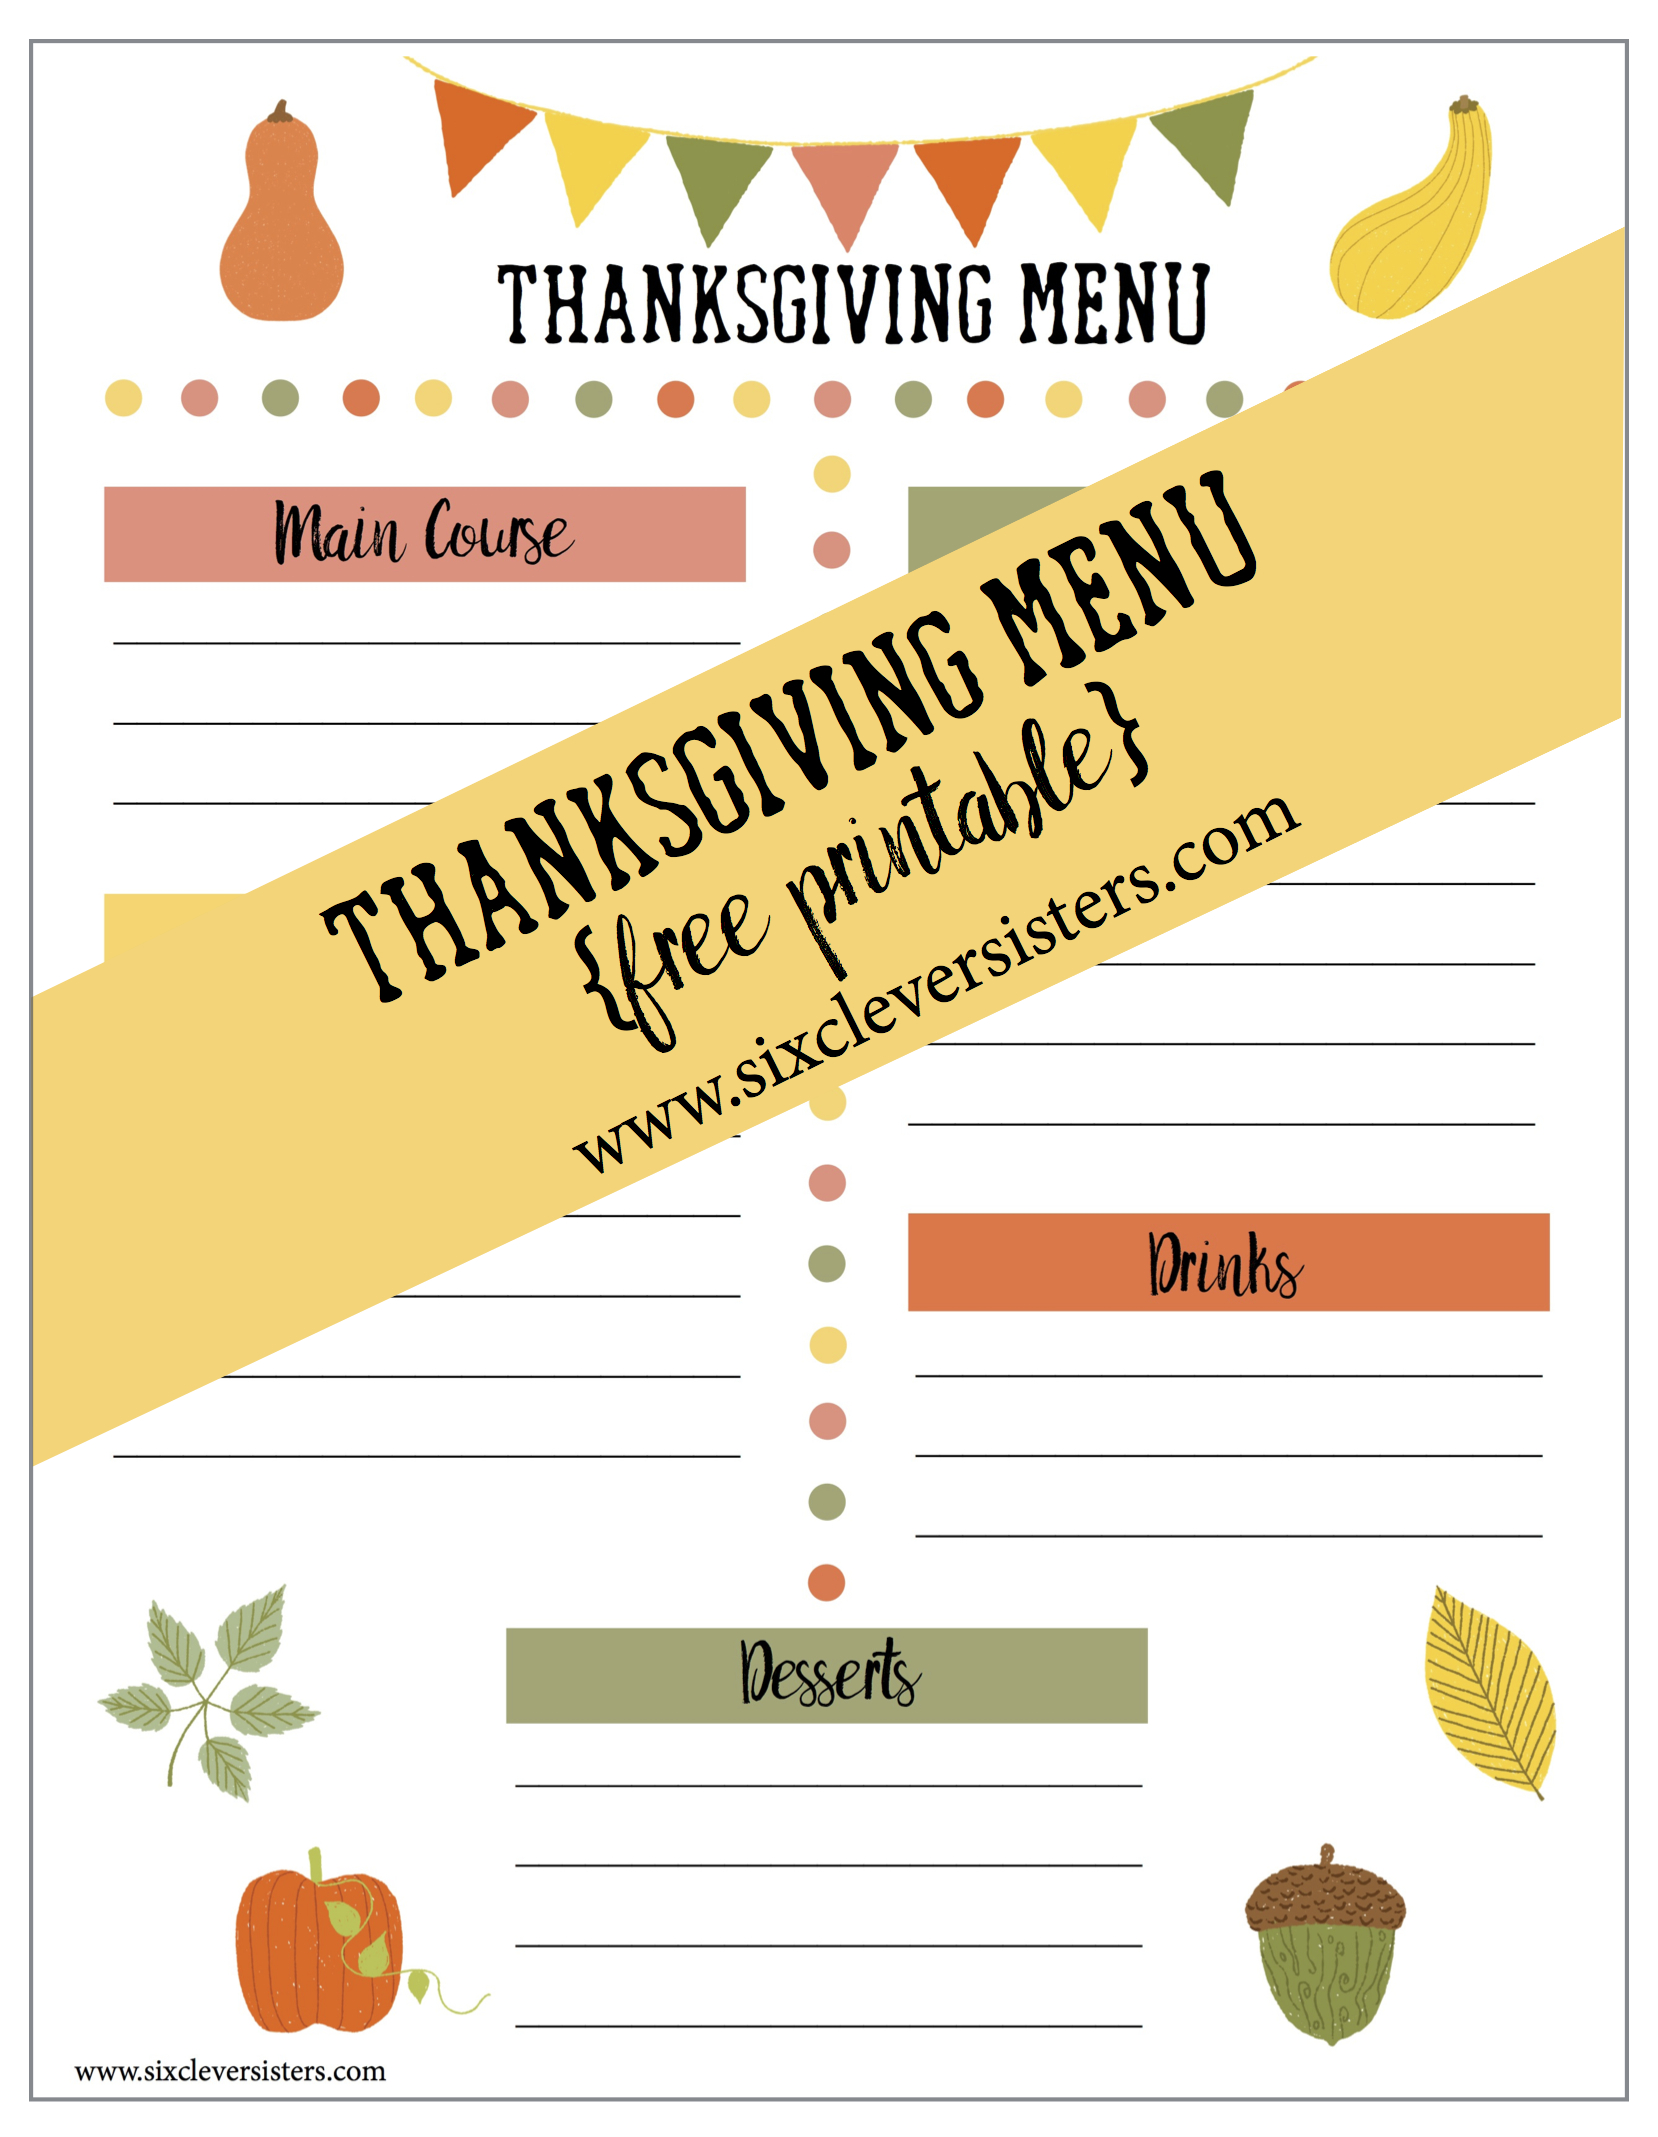 printable-thanksgiving-menu-and-shopping-list-six-clever-sisters